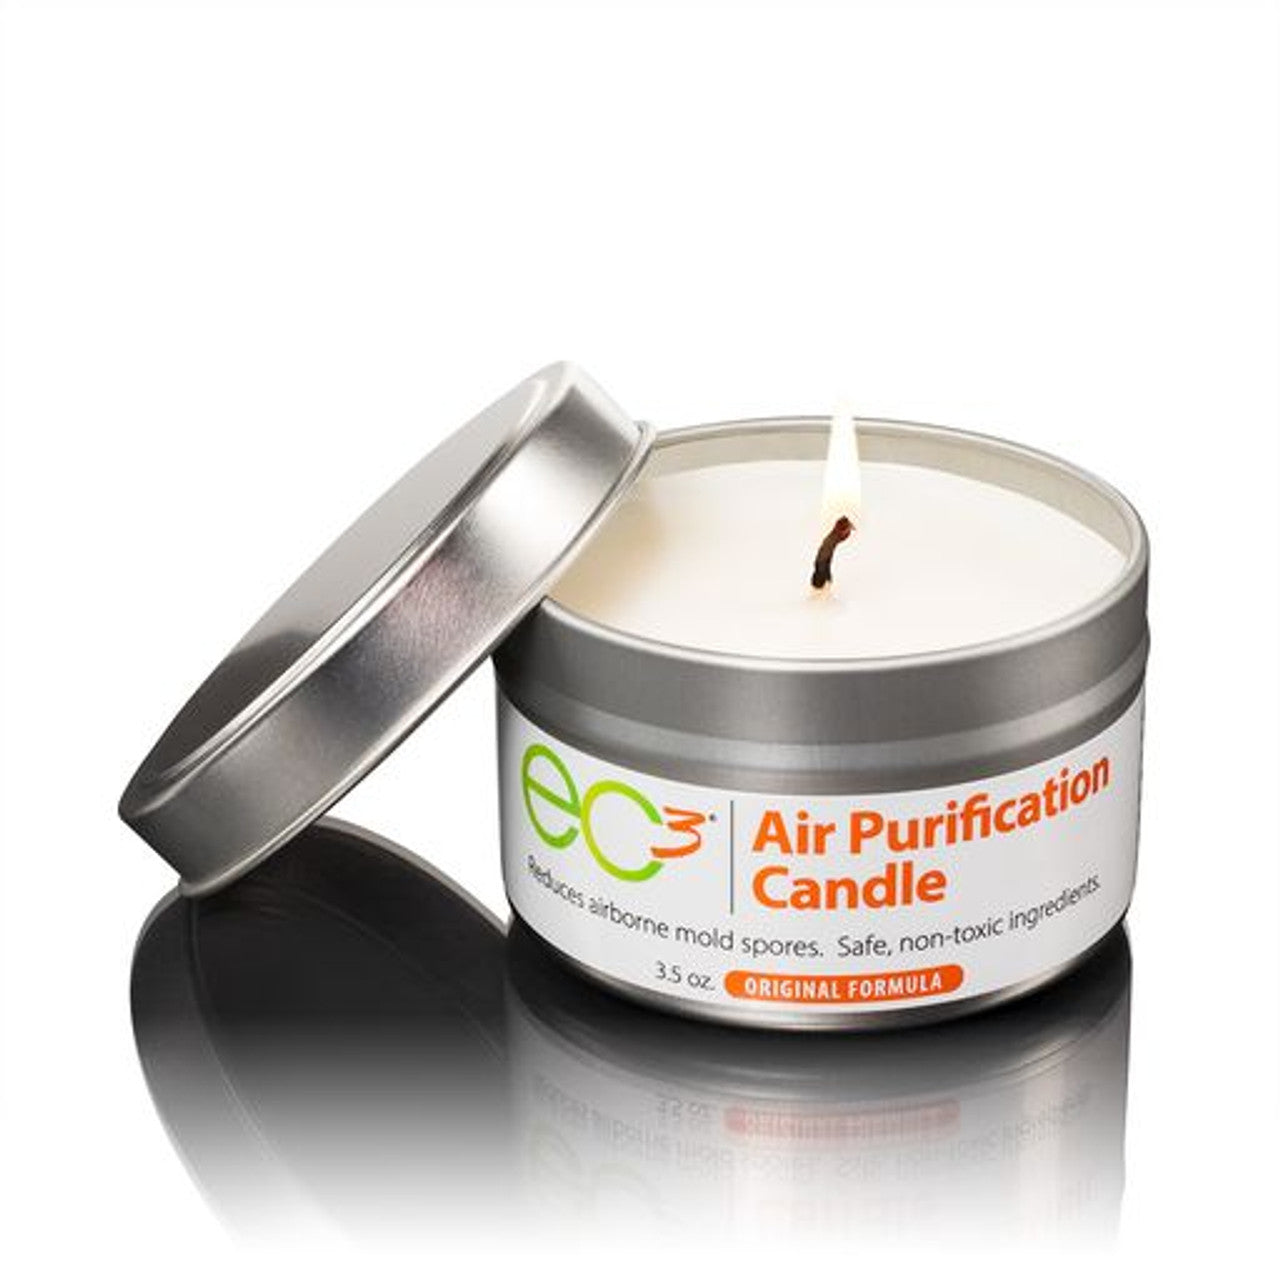 EC3 AIR PURIFICATION CANDLE